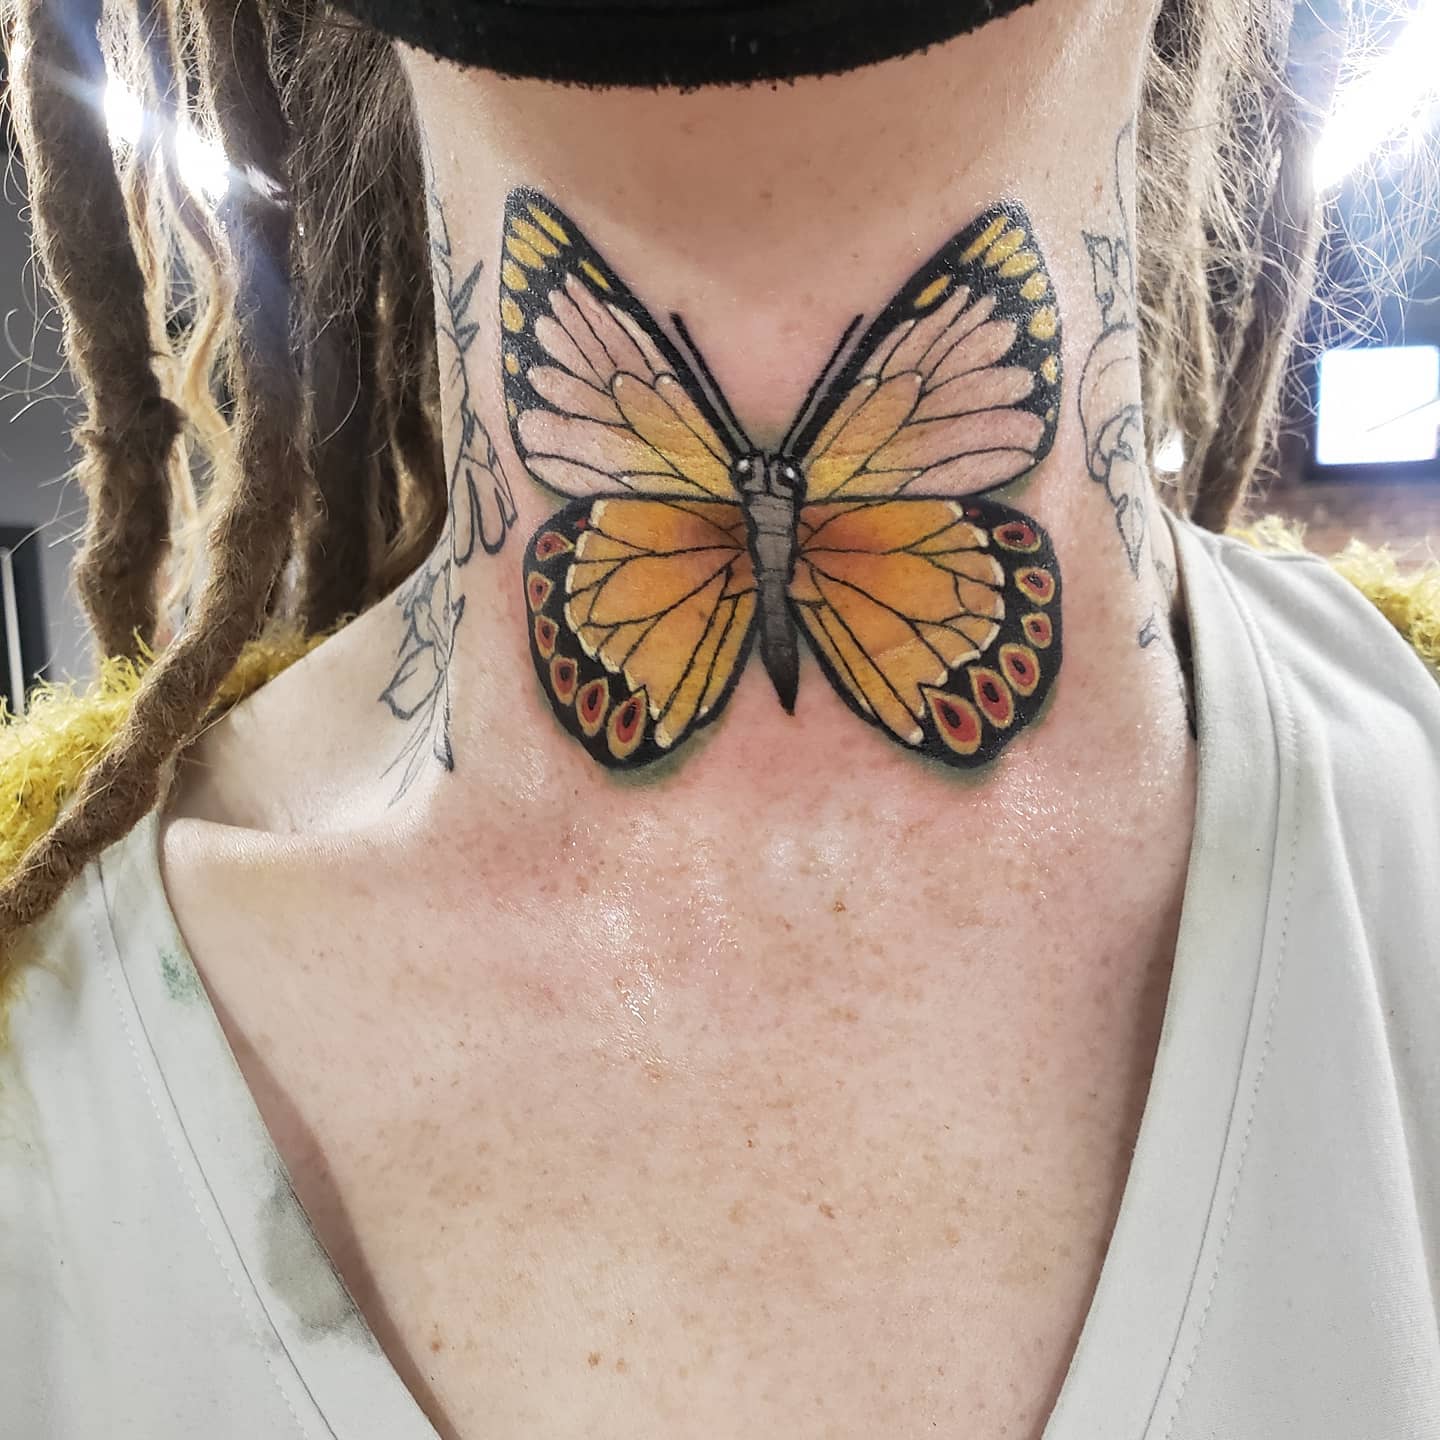 100 BackoftheNeck Tattoos That Are Easy to Hide and Fun to Show Off  Neck  tattoos women Back of neck tattoo Butterfly tattoos for women